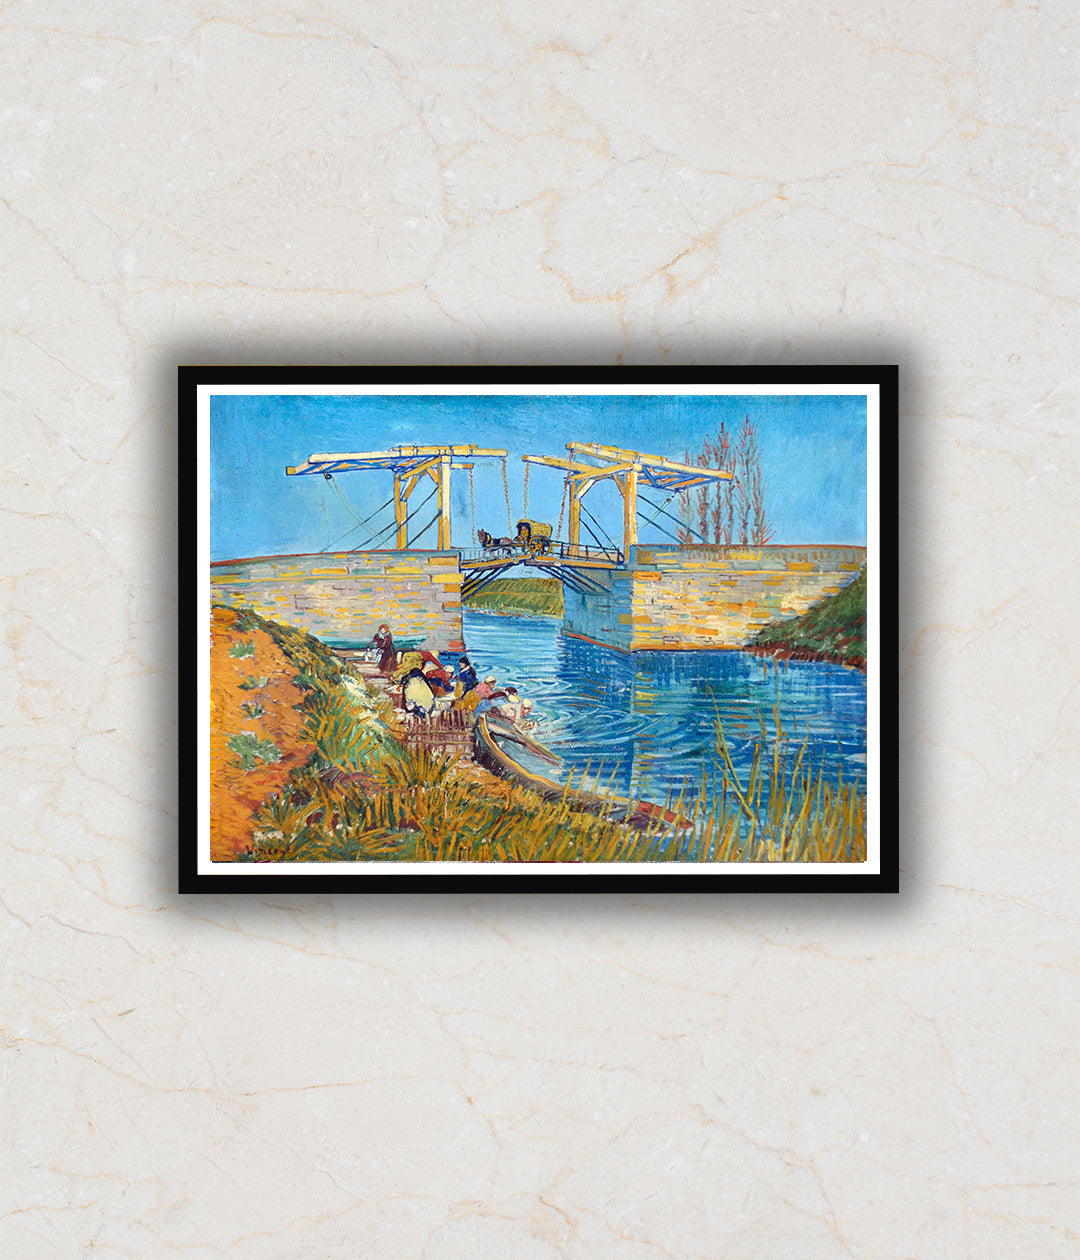 The Langlois Bridge at Arles with Women Washing (1888) Artwork Painting For Home Wall Art D�_cor By Vincent Van Gogh